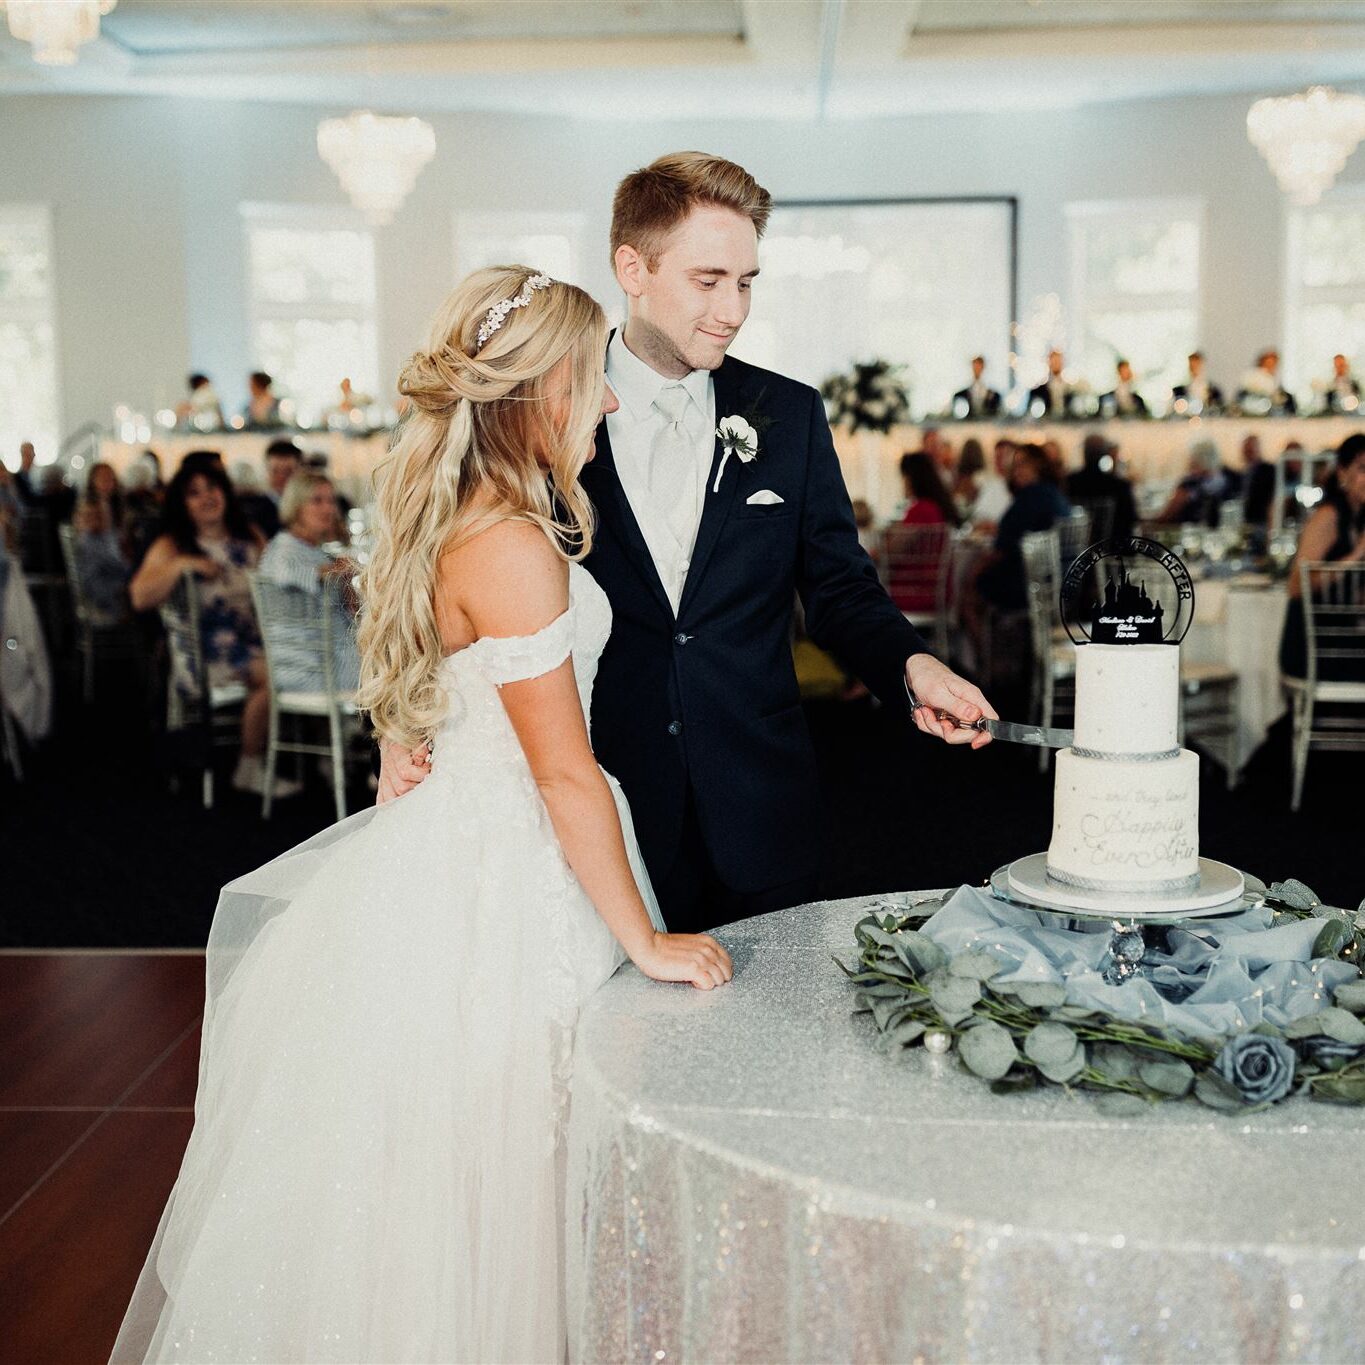 A bride and groom cutting a two layer wedding cake while the guests watch from their tables in the background.